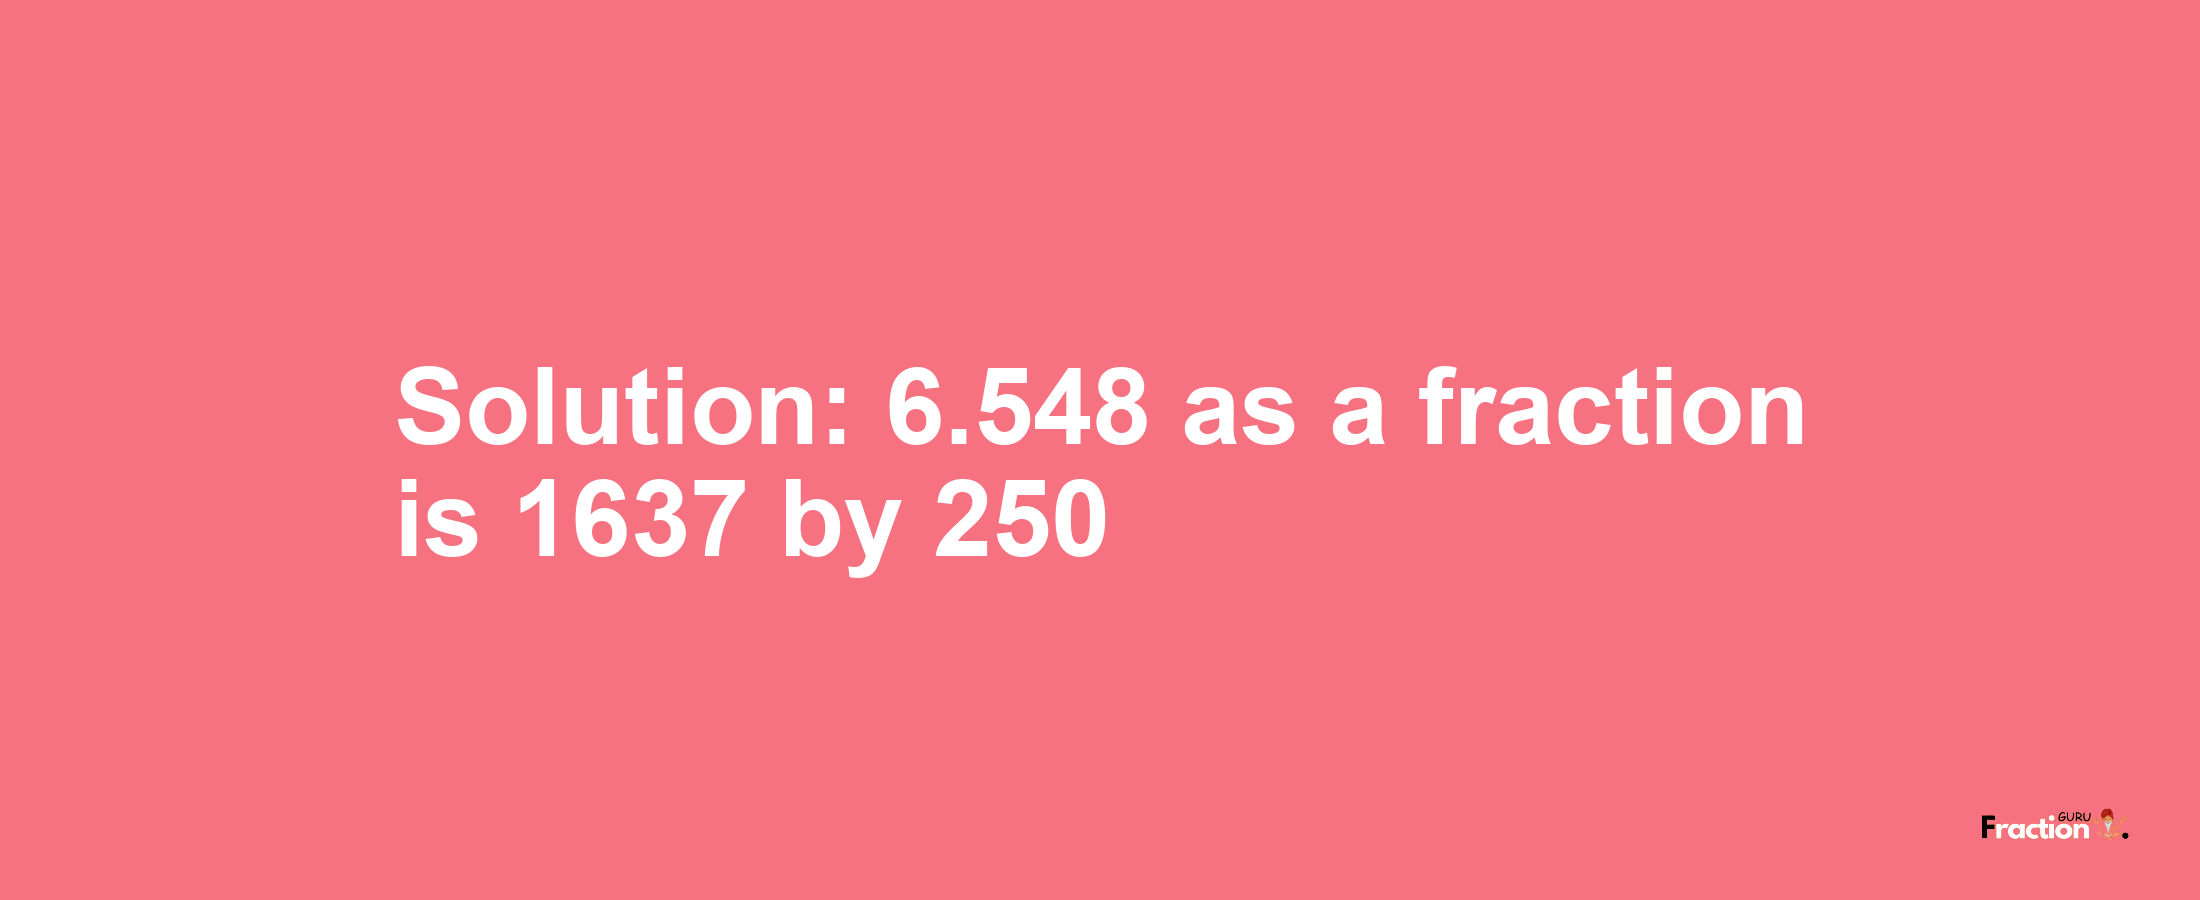 Solution:6.548 as a fraction is 1637/250